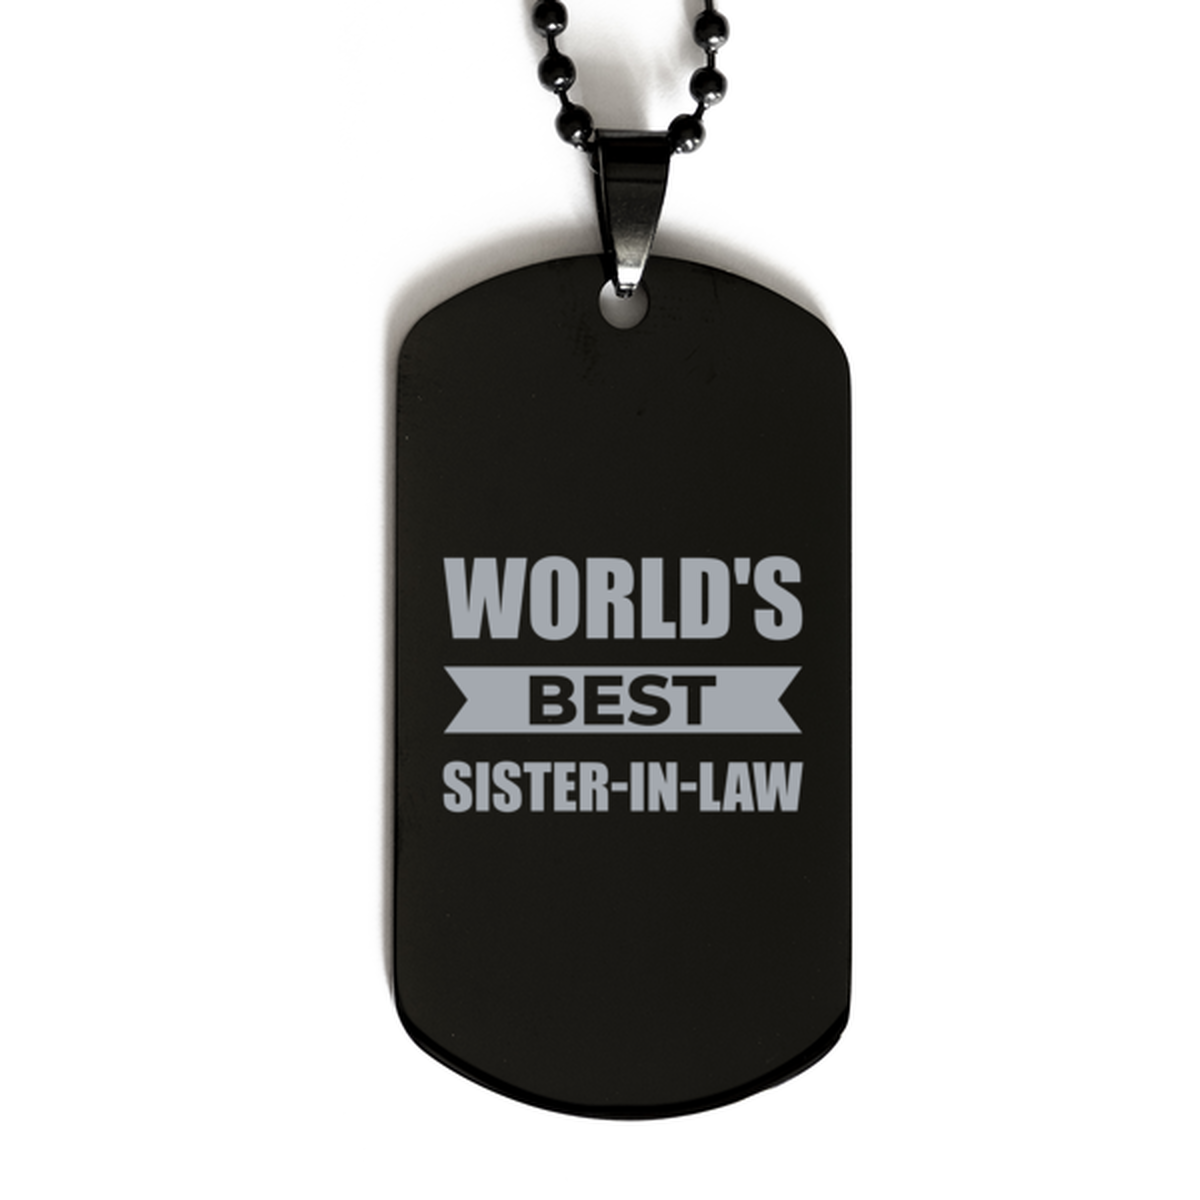 Worlds Best Sister-in-law Gifts, Funny Black Engraved Dog Tag For Sister-in-law, Birthday Presents For Women